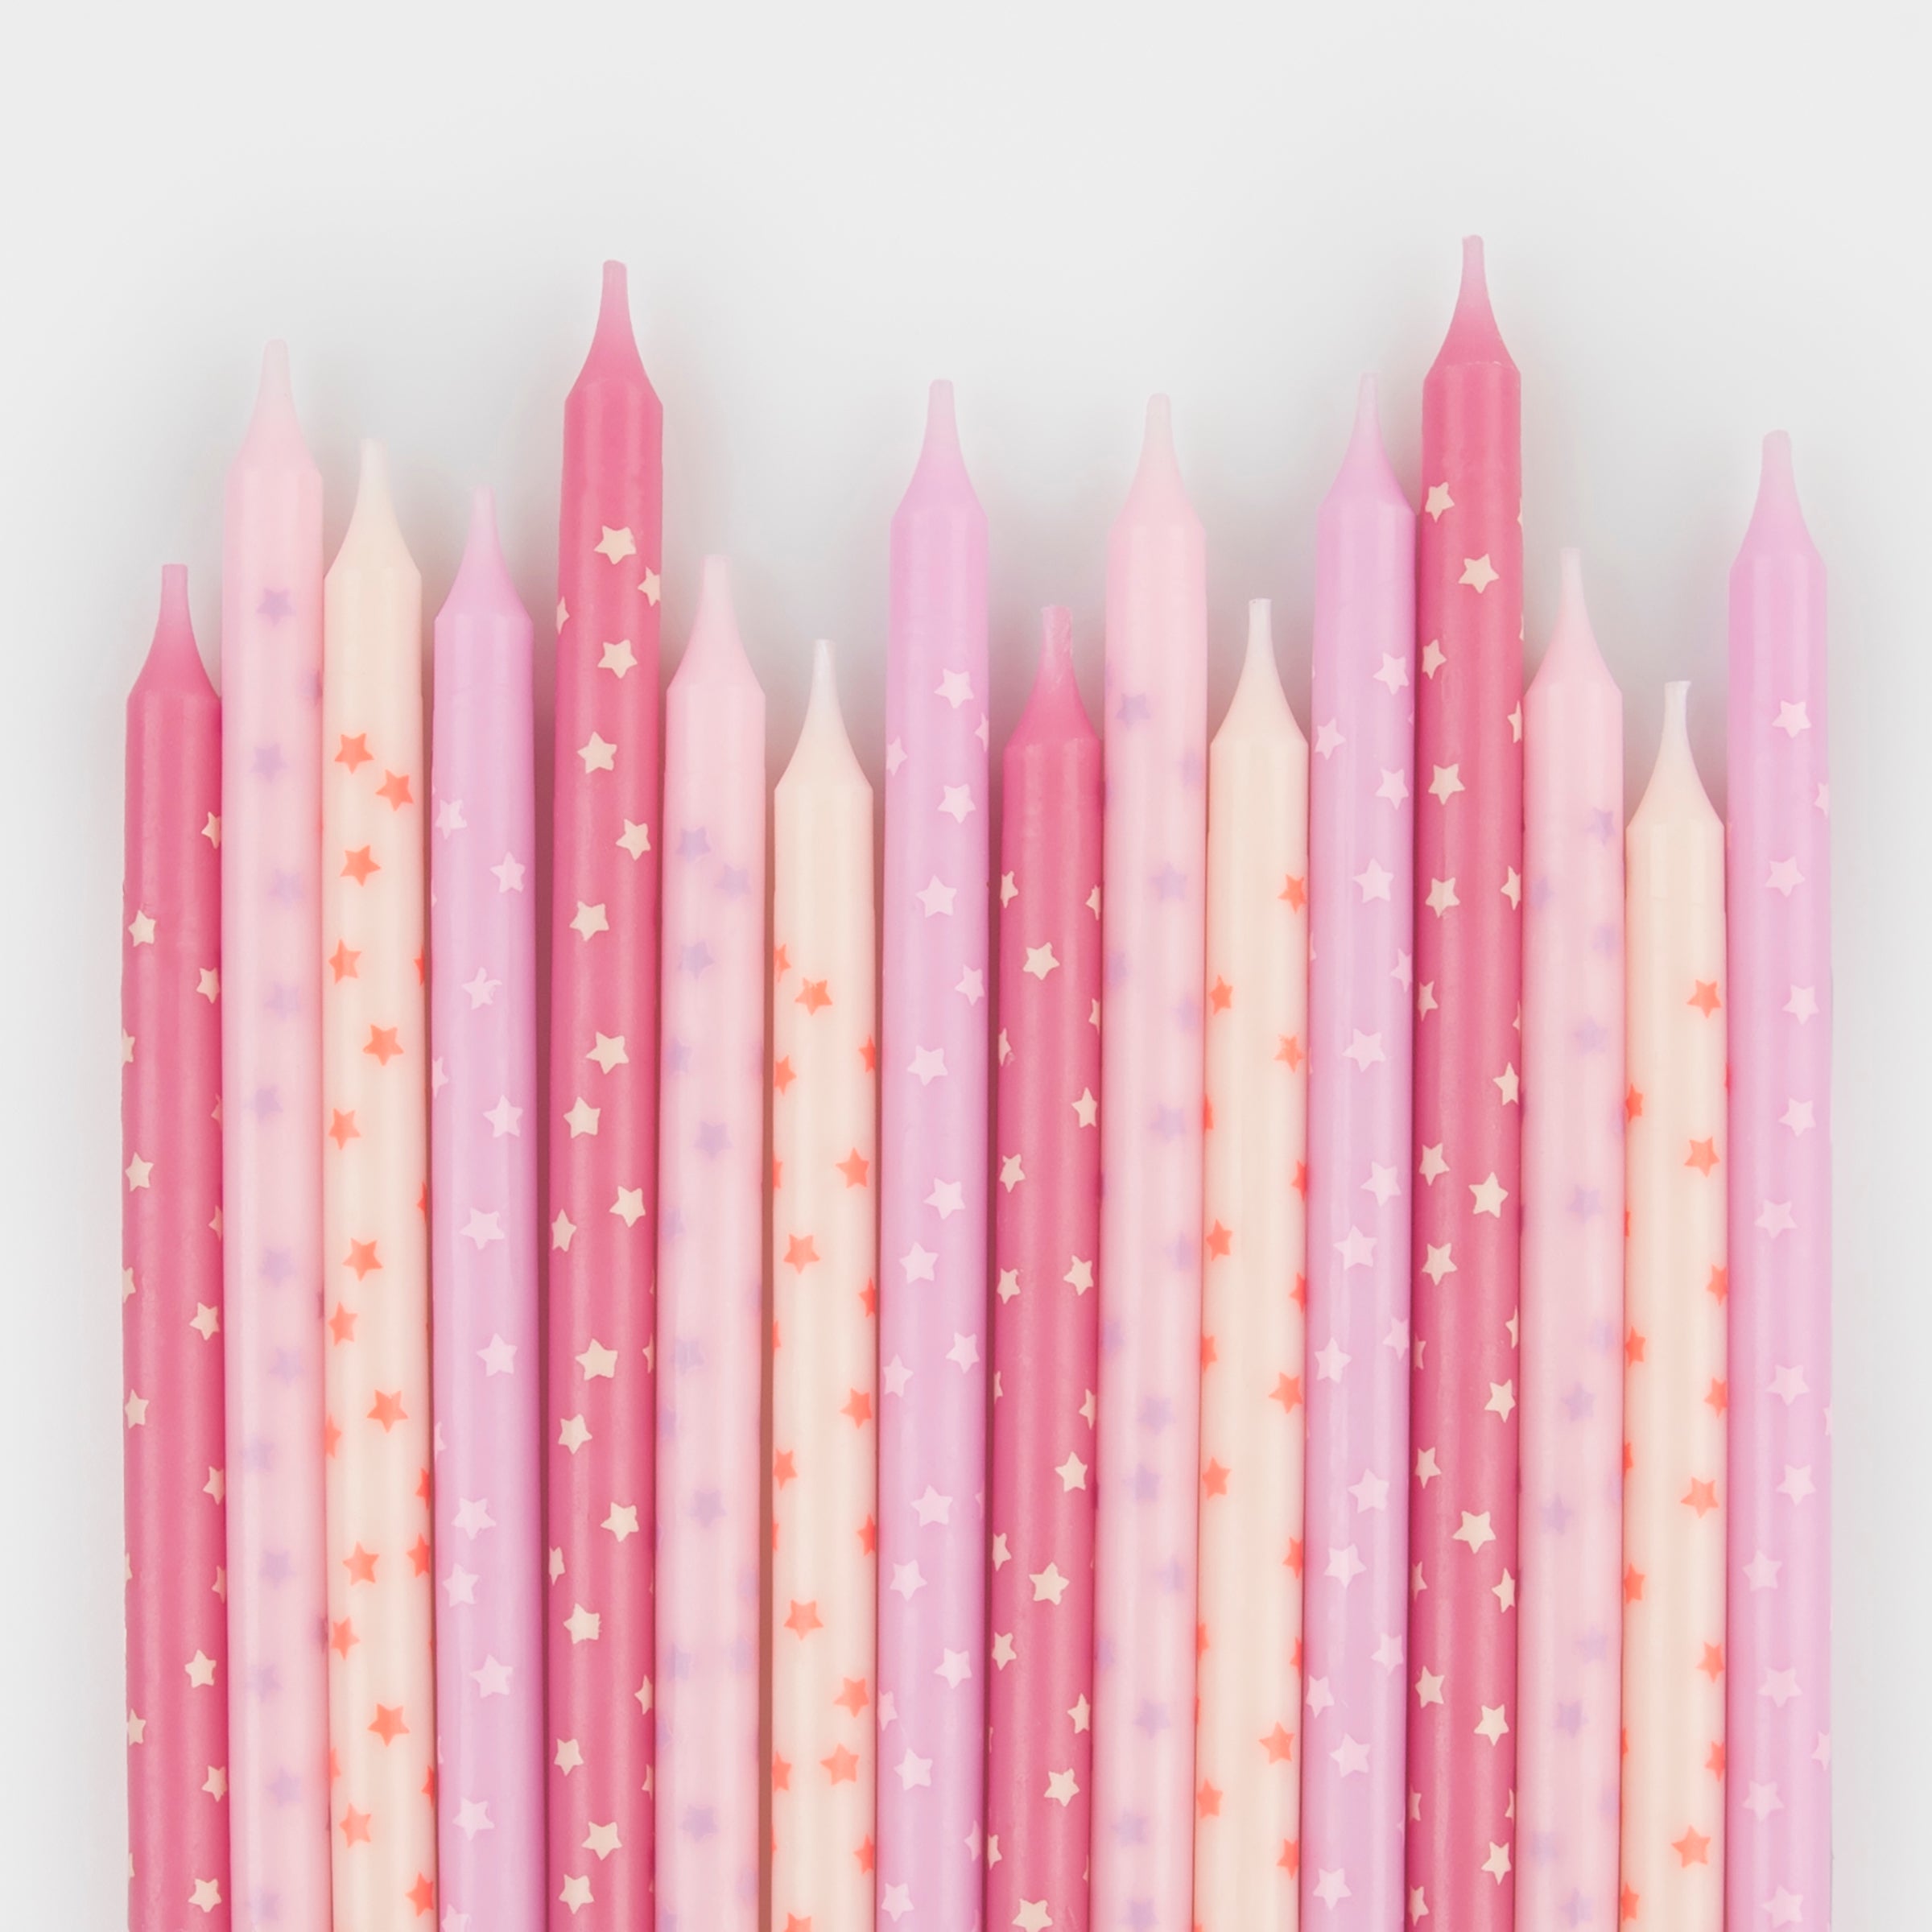 Our pink candles, with star details, are ideal as birthday candles for cakes or cupcakes.